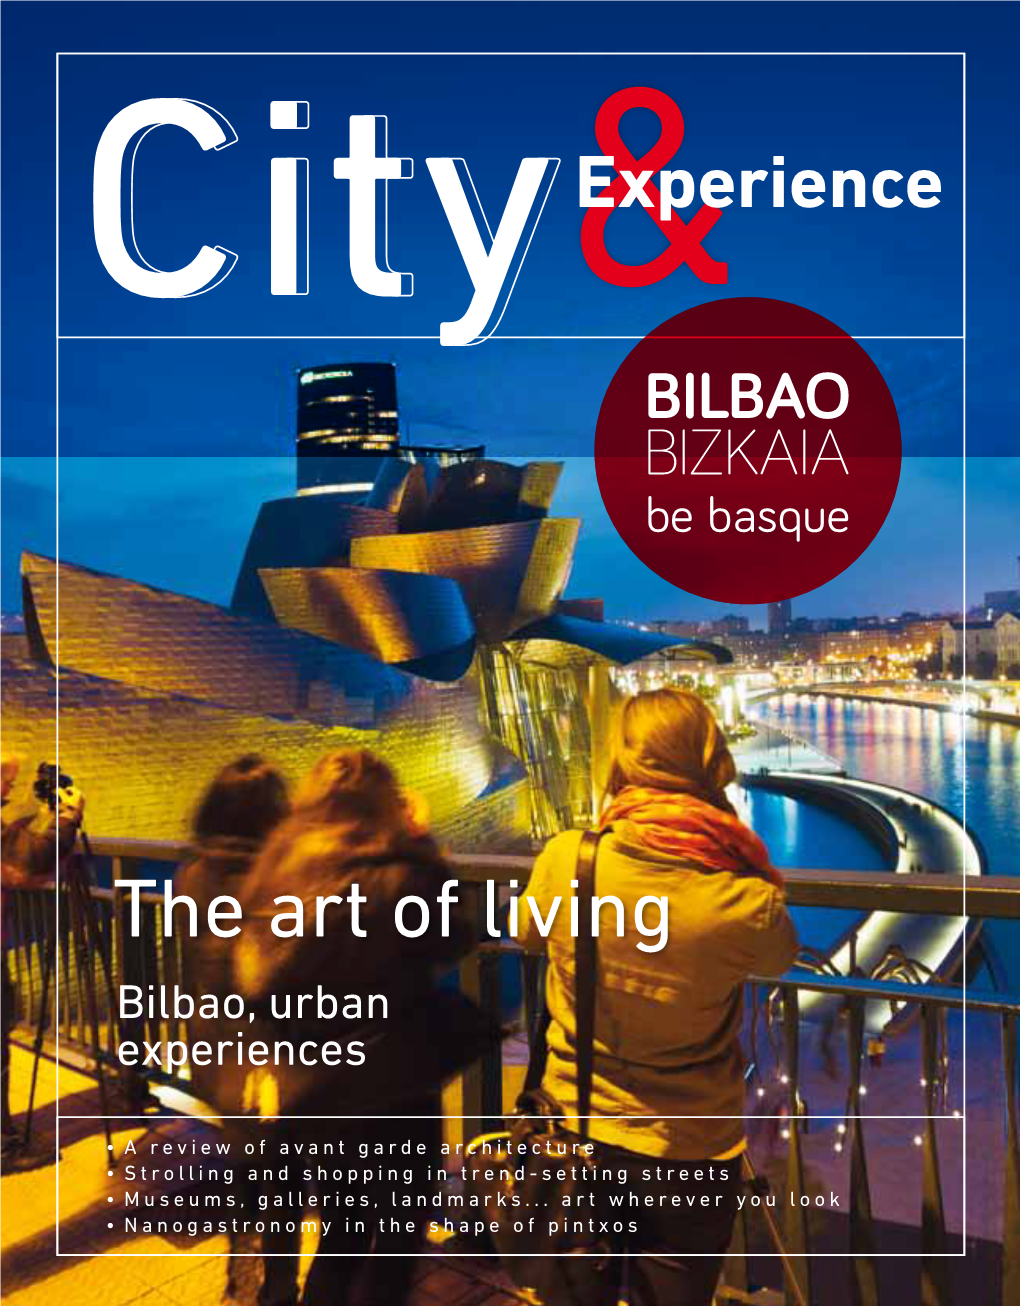 City & Experience Download 5.7 MB